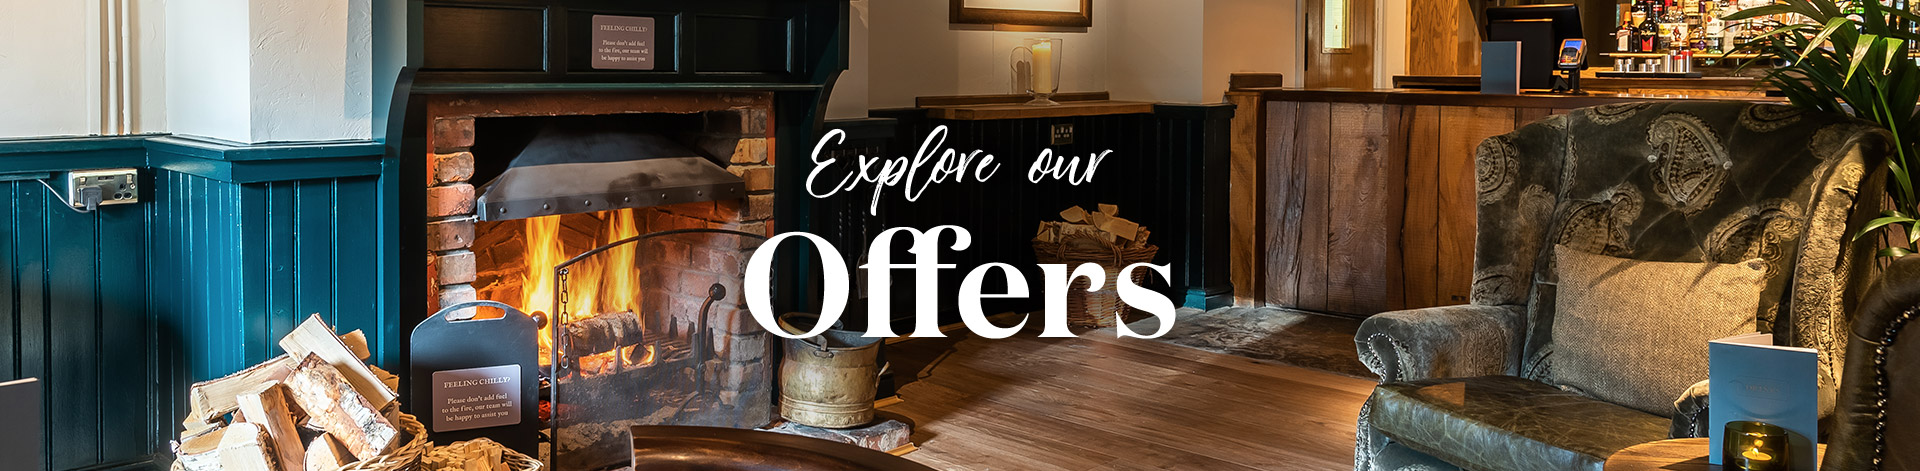 Our latest offers at The Star Inn